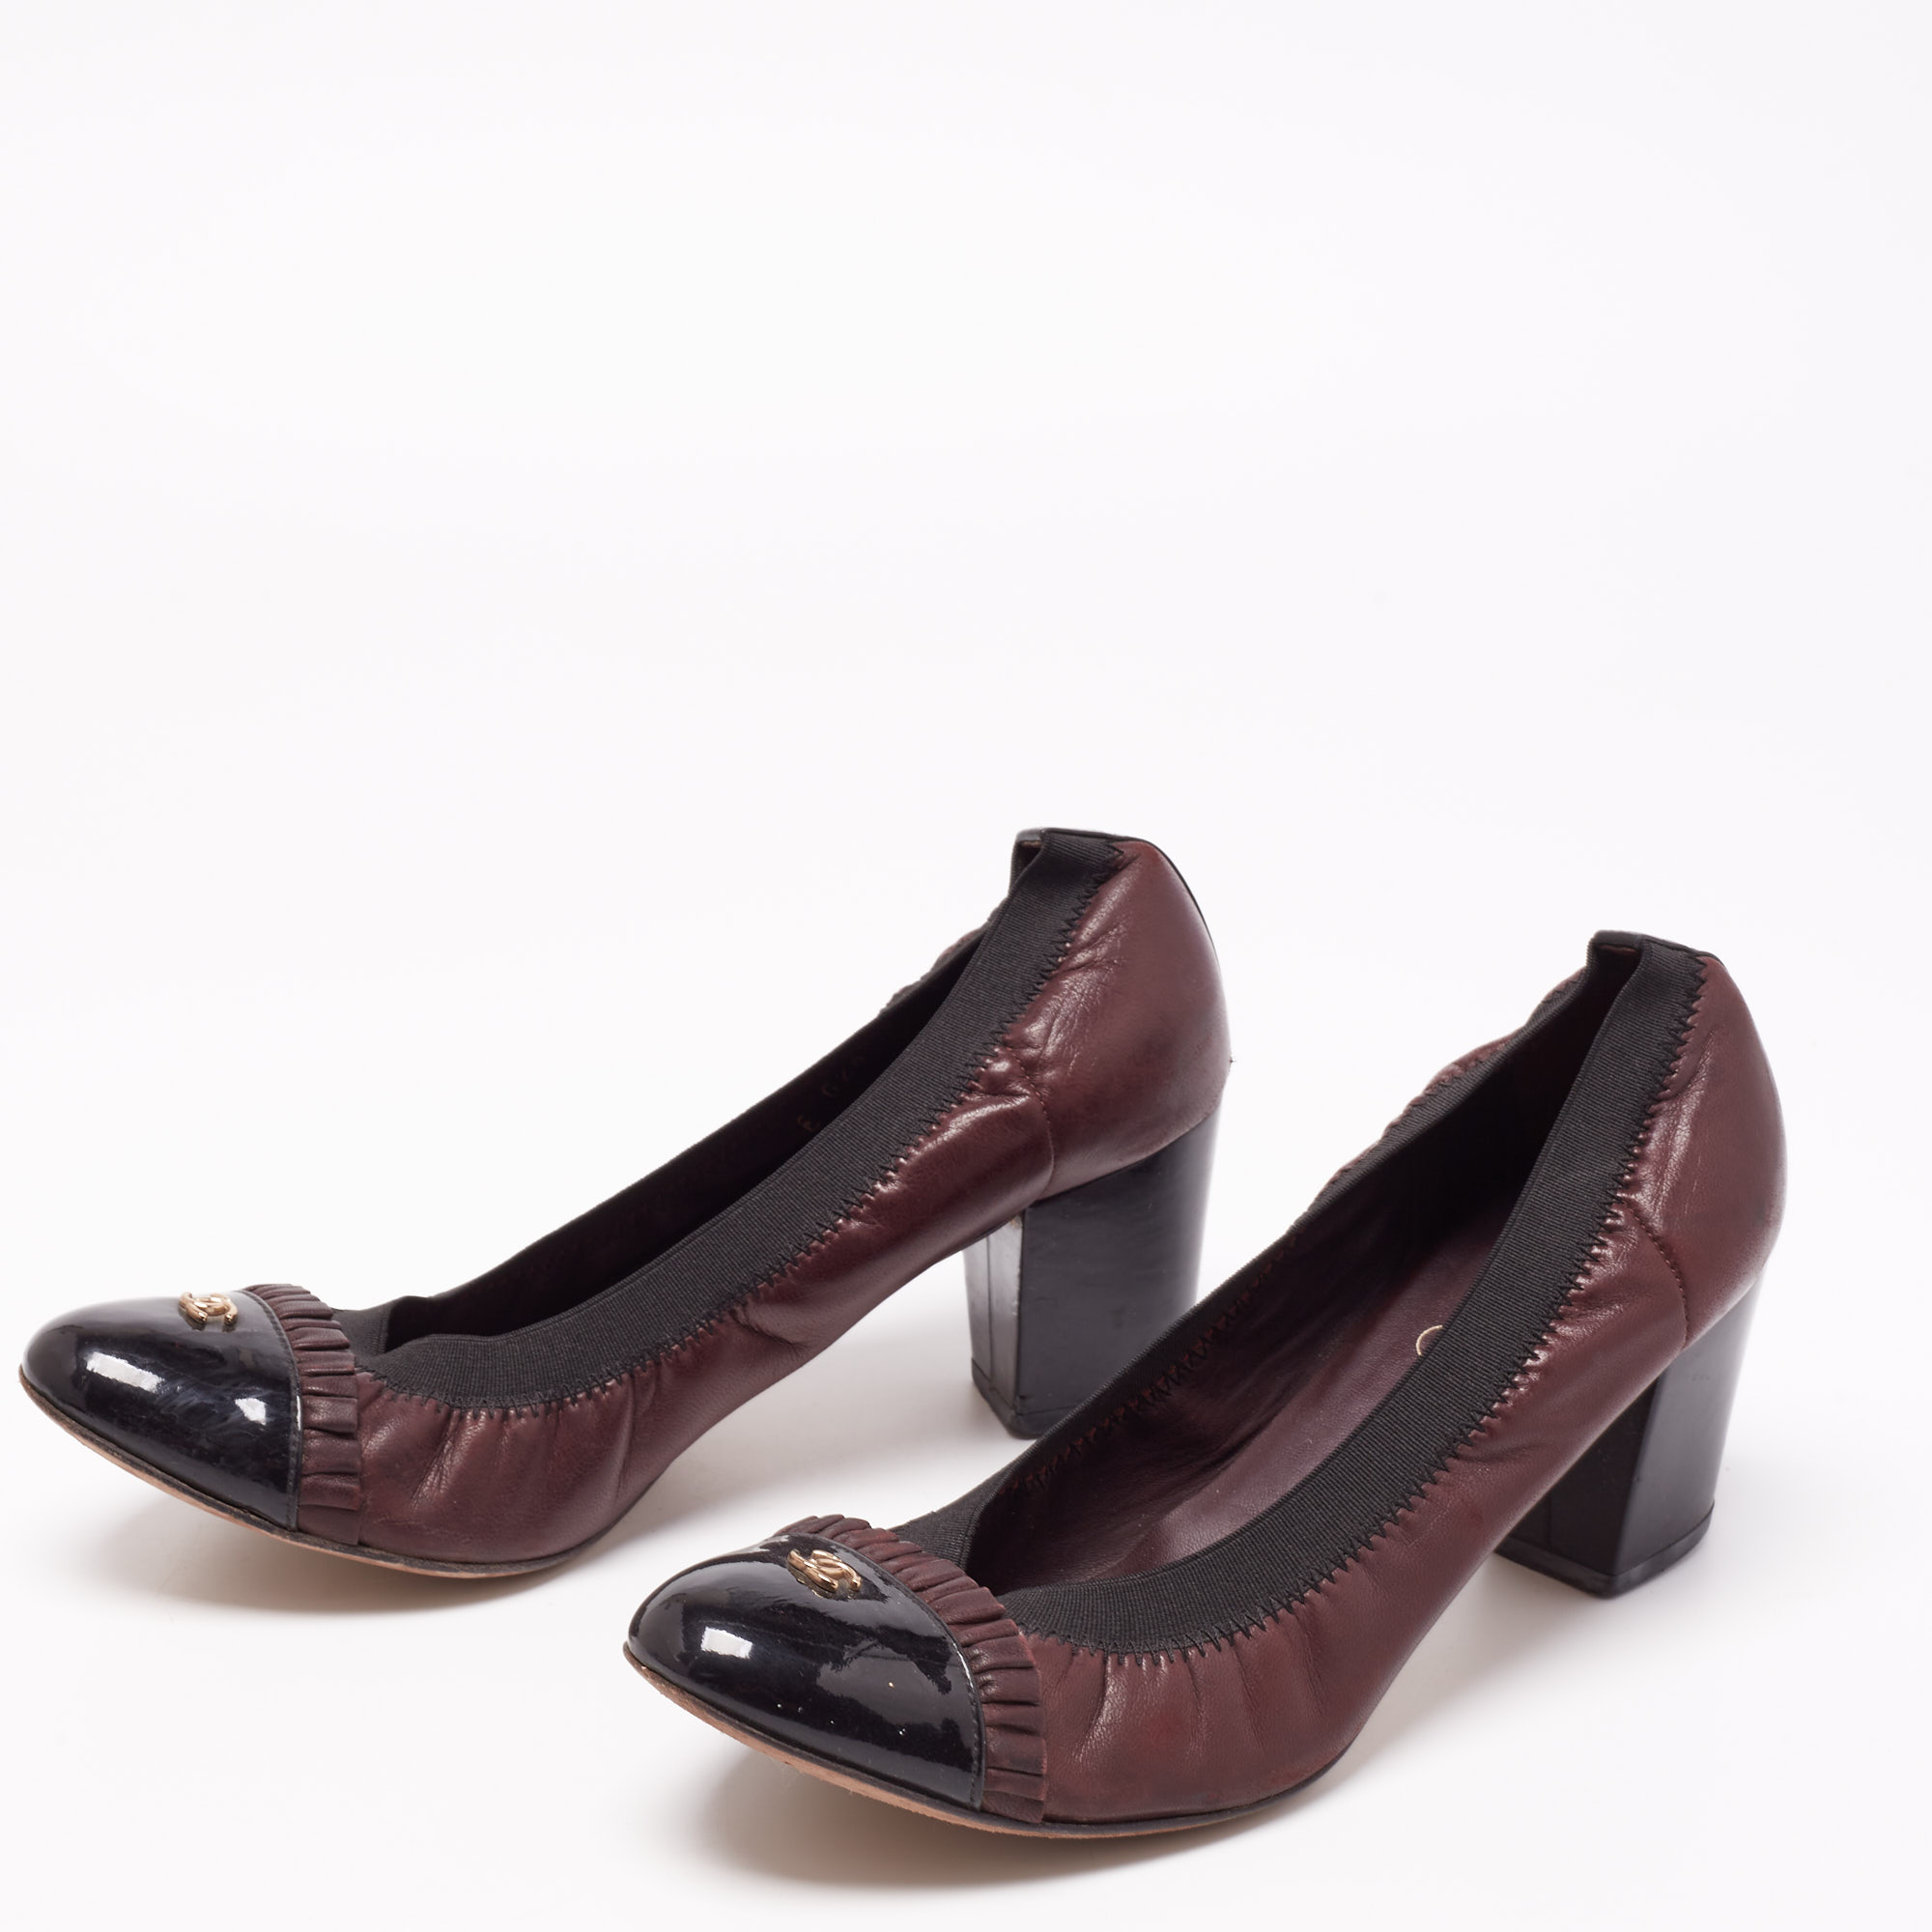 

Chanel Dark Brown/Black Leather And Patent Leather Ruffle CC Cap Toe Scrunch Block Heel Pumps Size